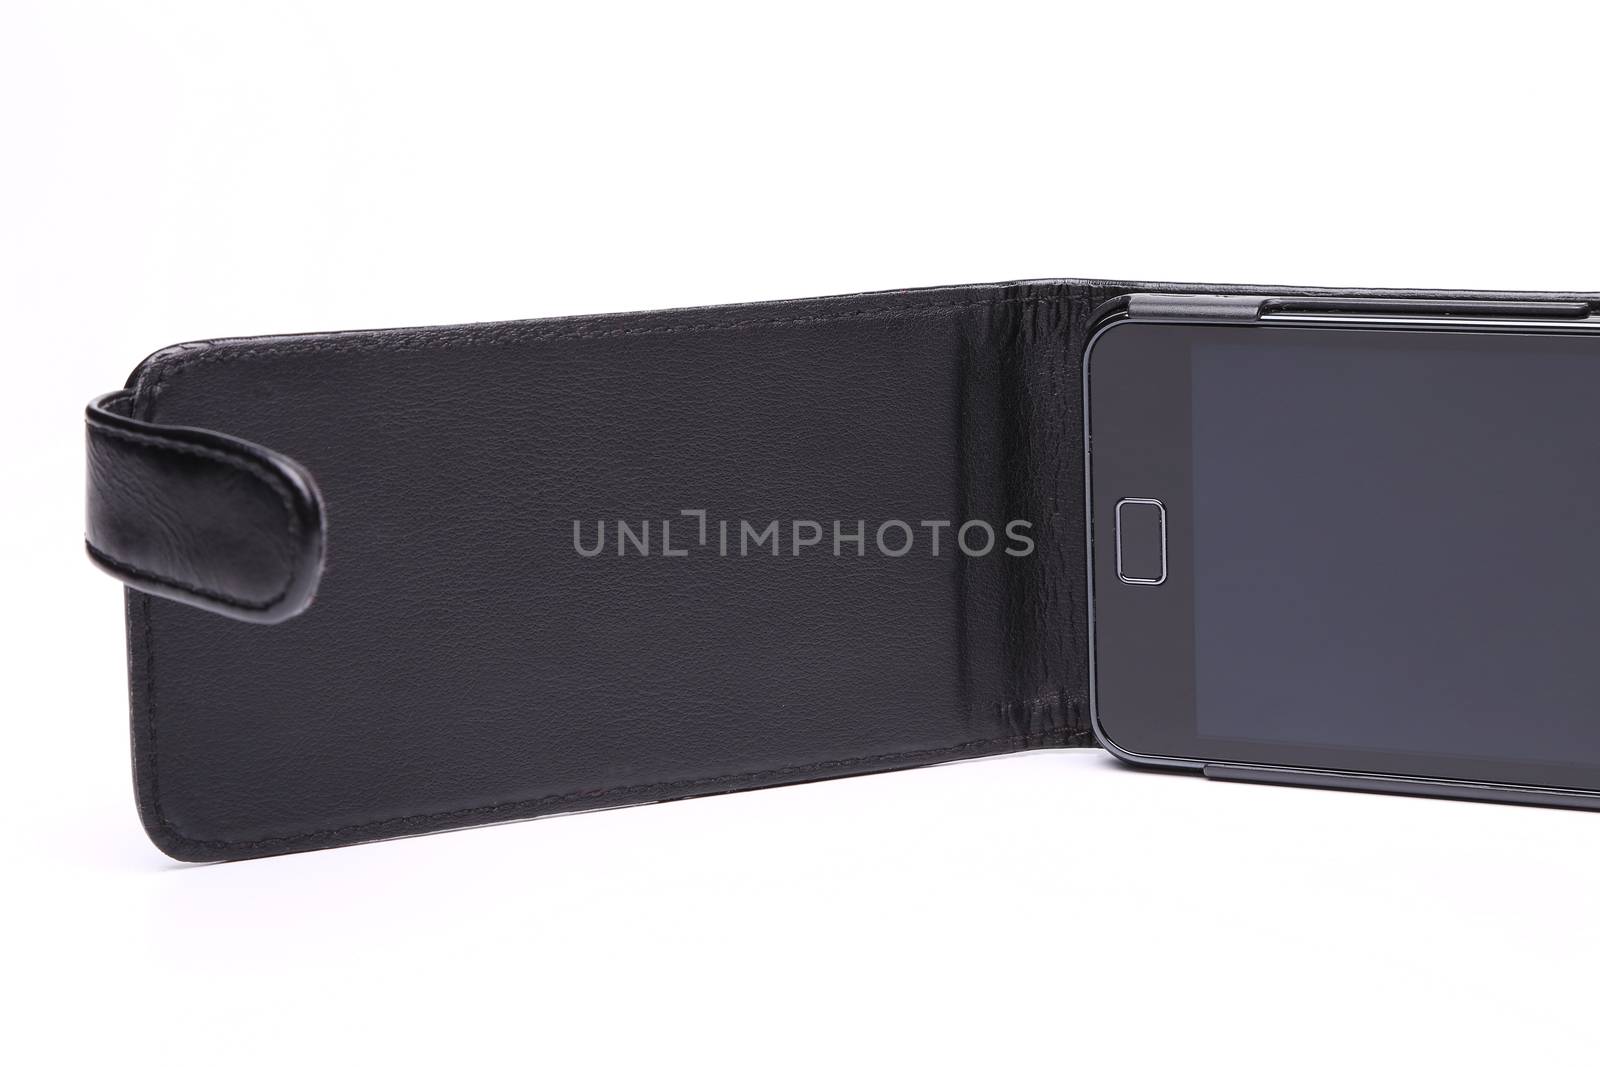 Mobile phone in its case over white background by indigolotos